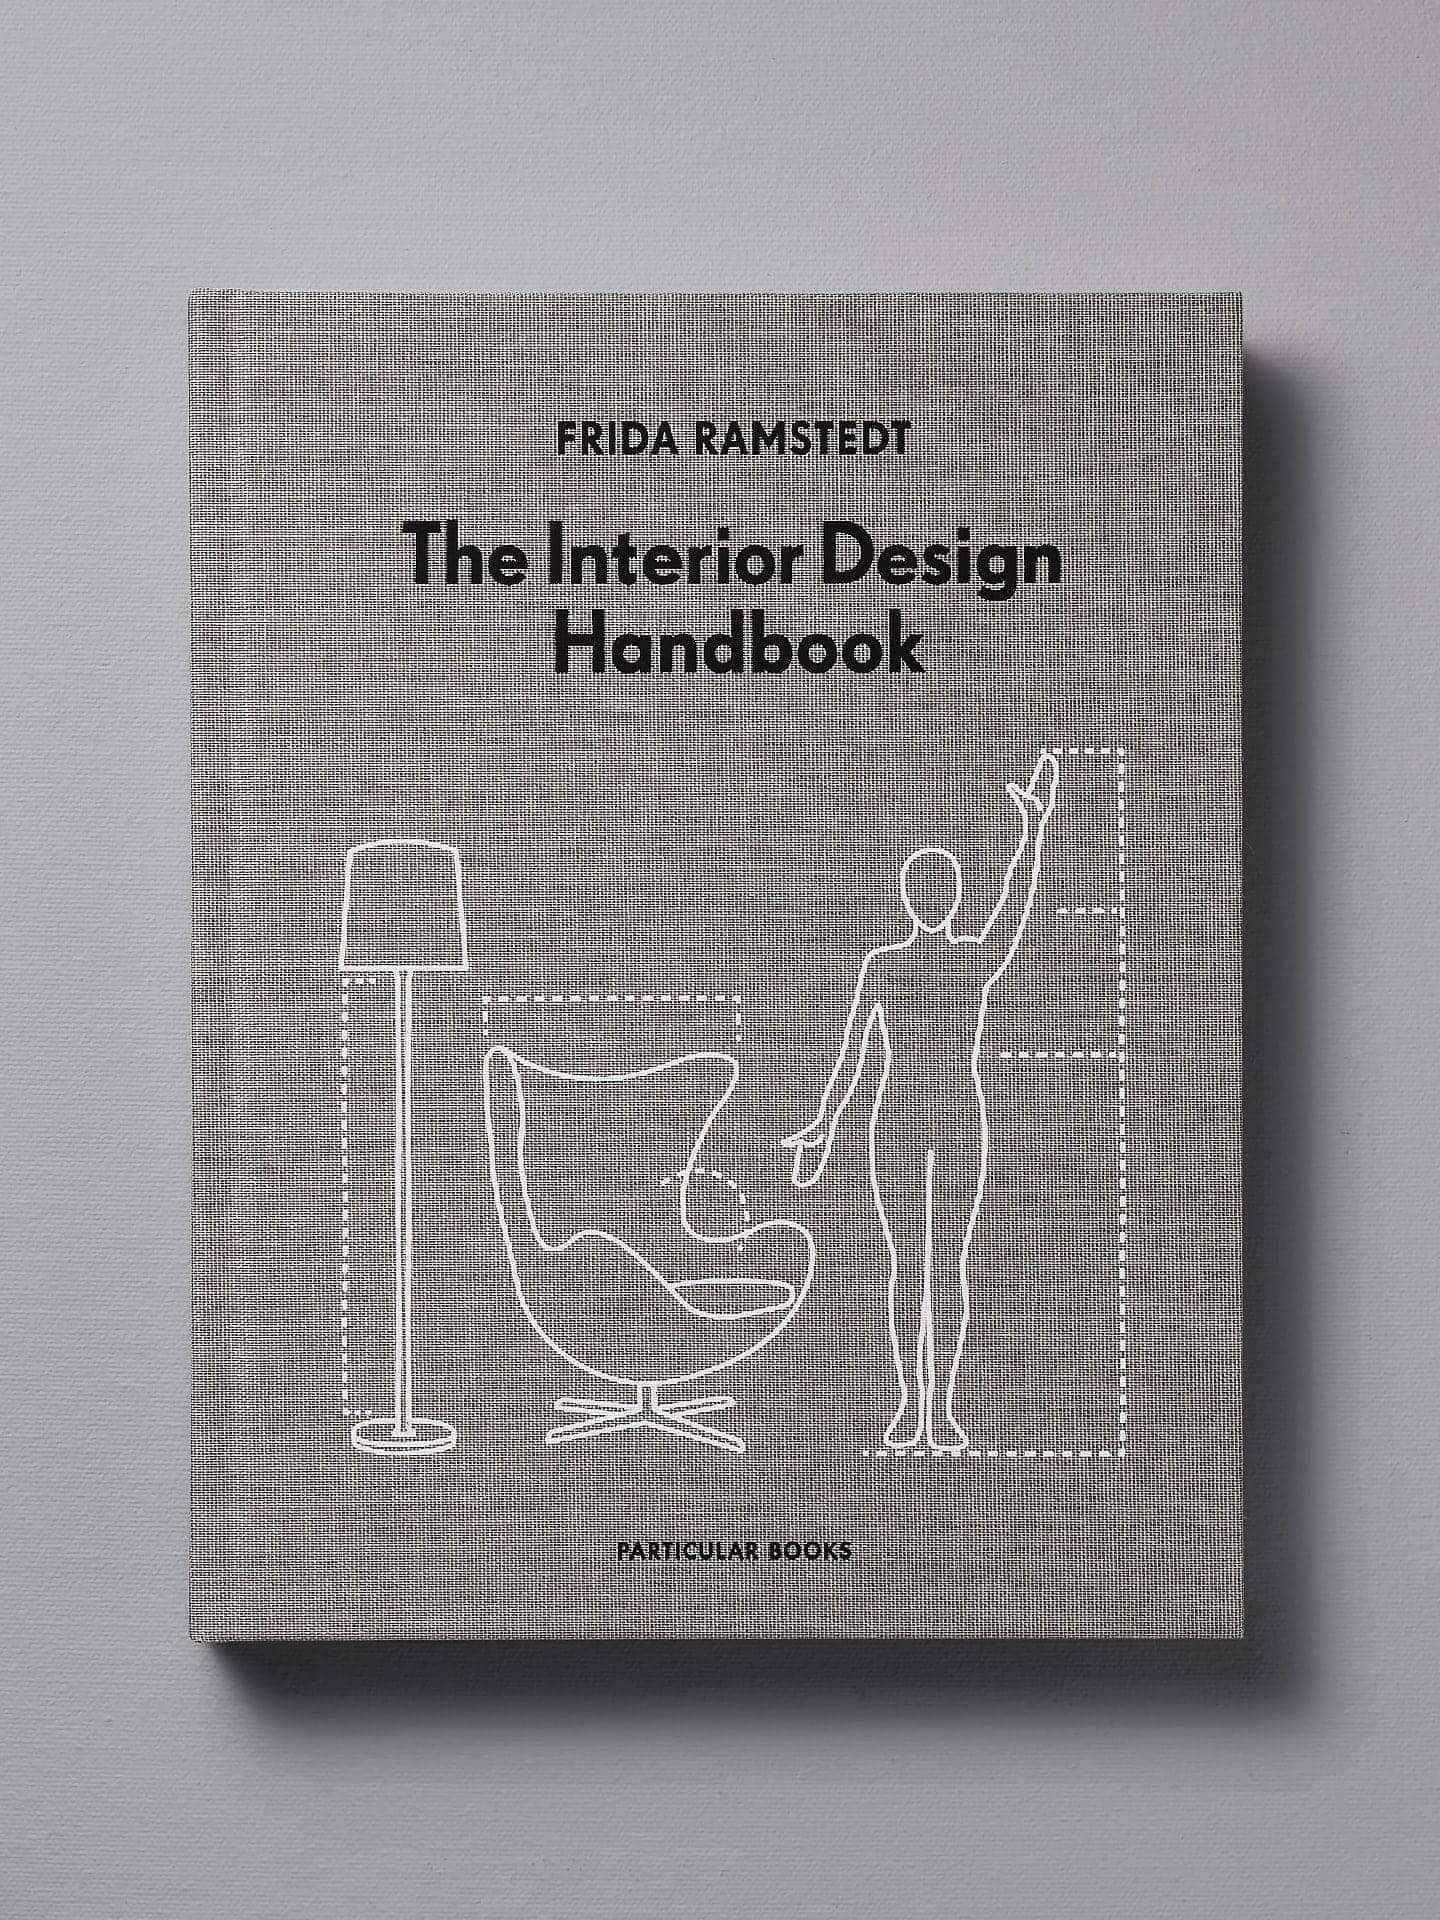 The successful interior design handbook, expertly curated by Frida Ramstedt for that professional touch.